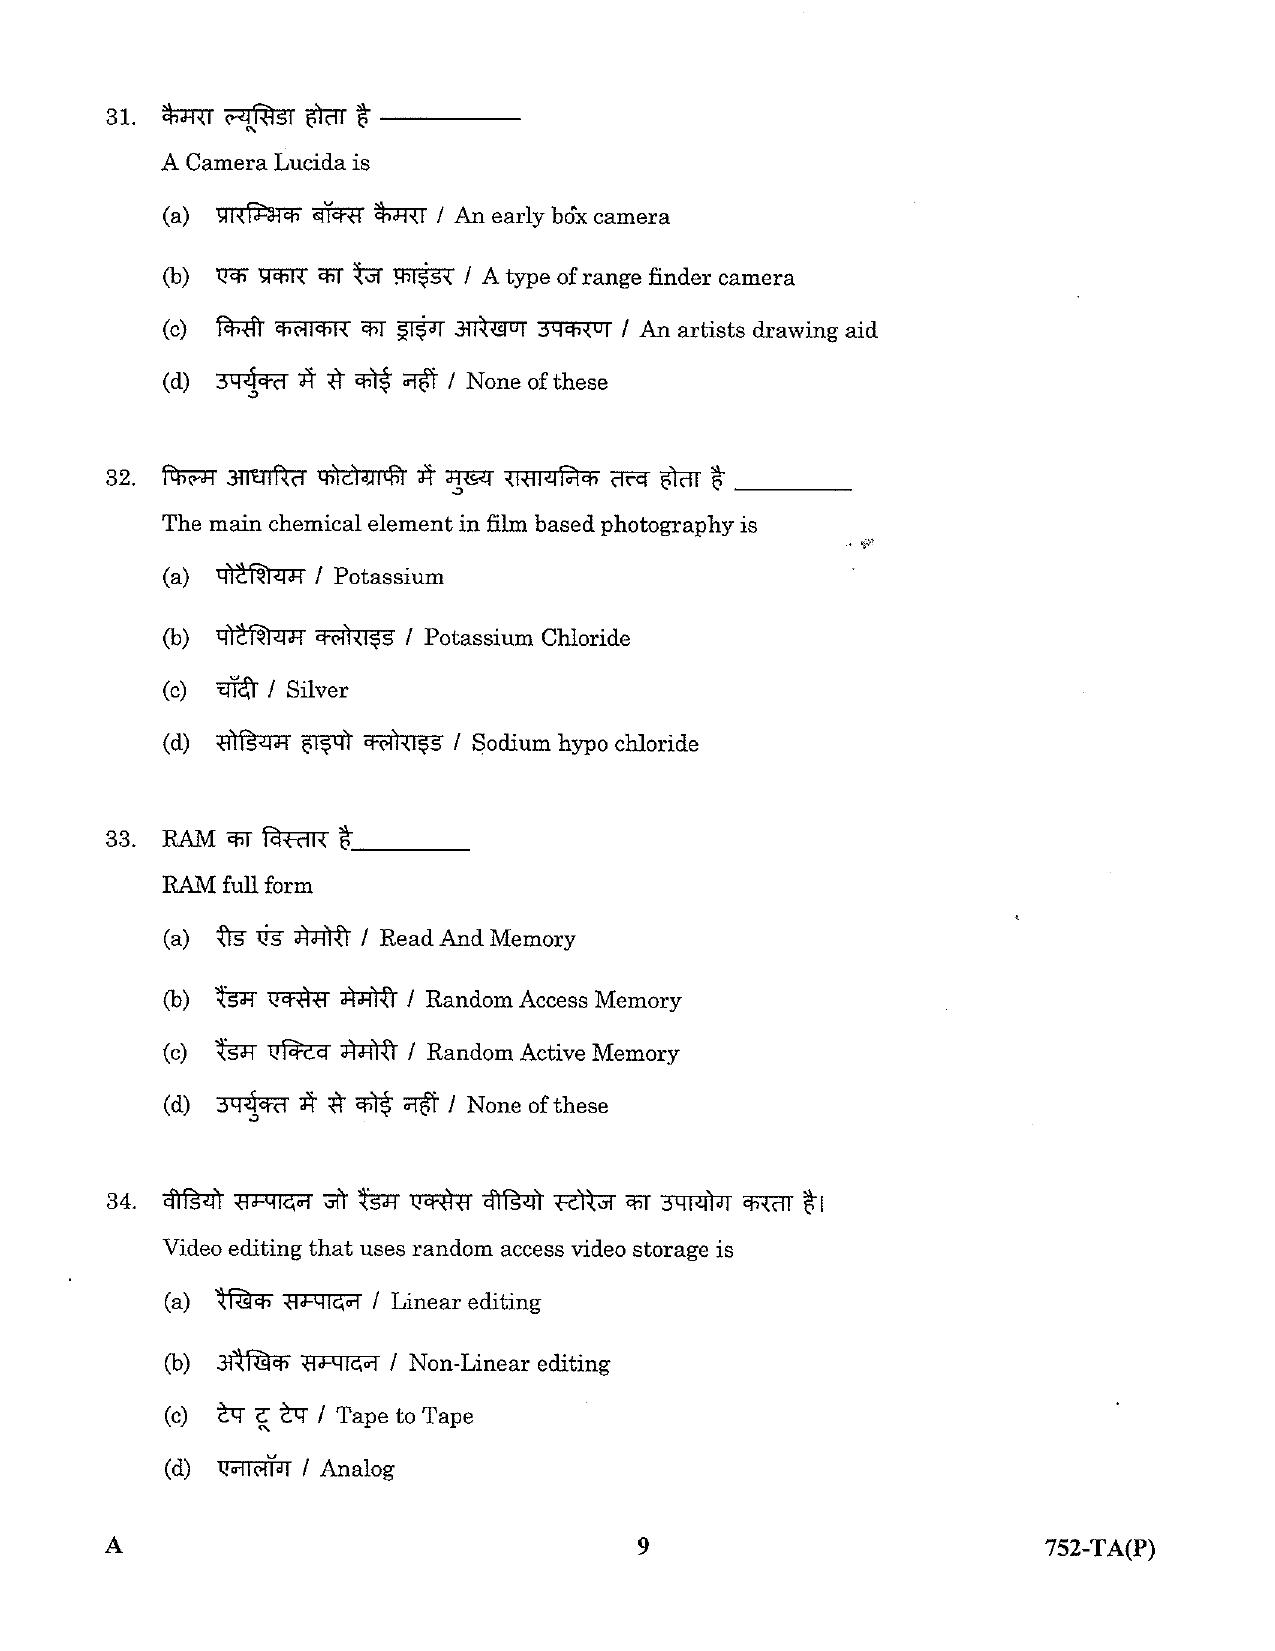 LPSC Technical Assistant (Photography) 2023 Question Paper - Page 9